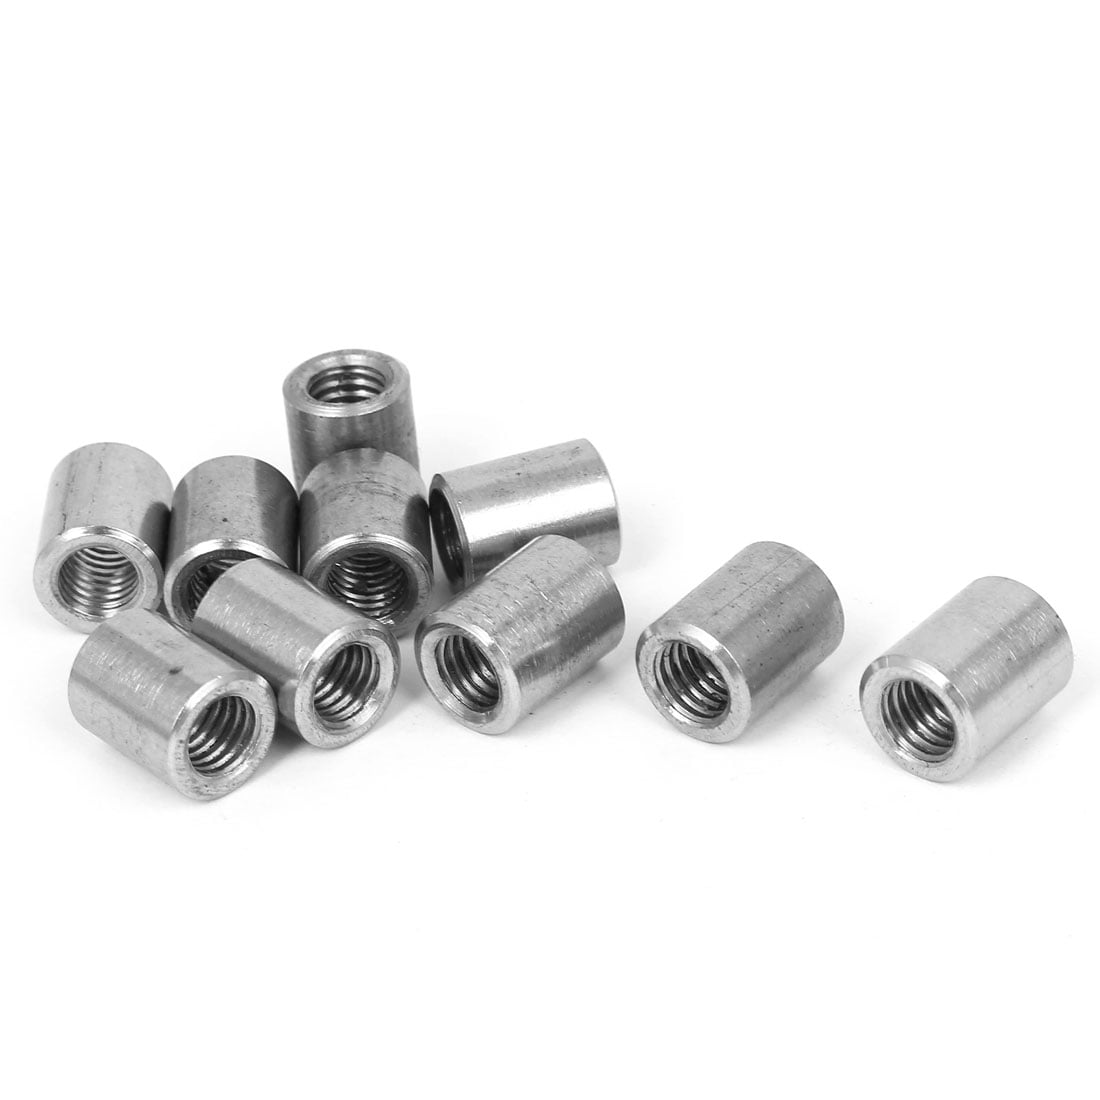 Fitting 10 Pack Round Threaded Tube Inserts 35mm M8 Metal Thread Tube Inserts 